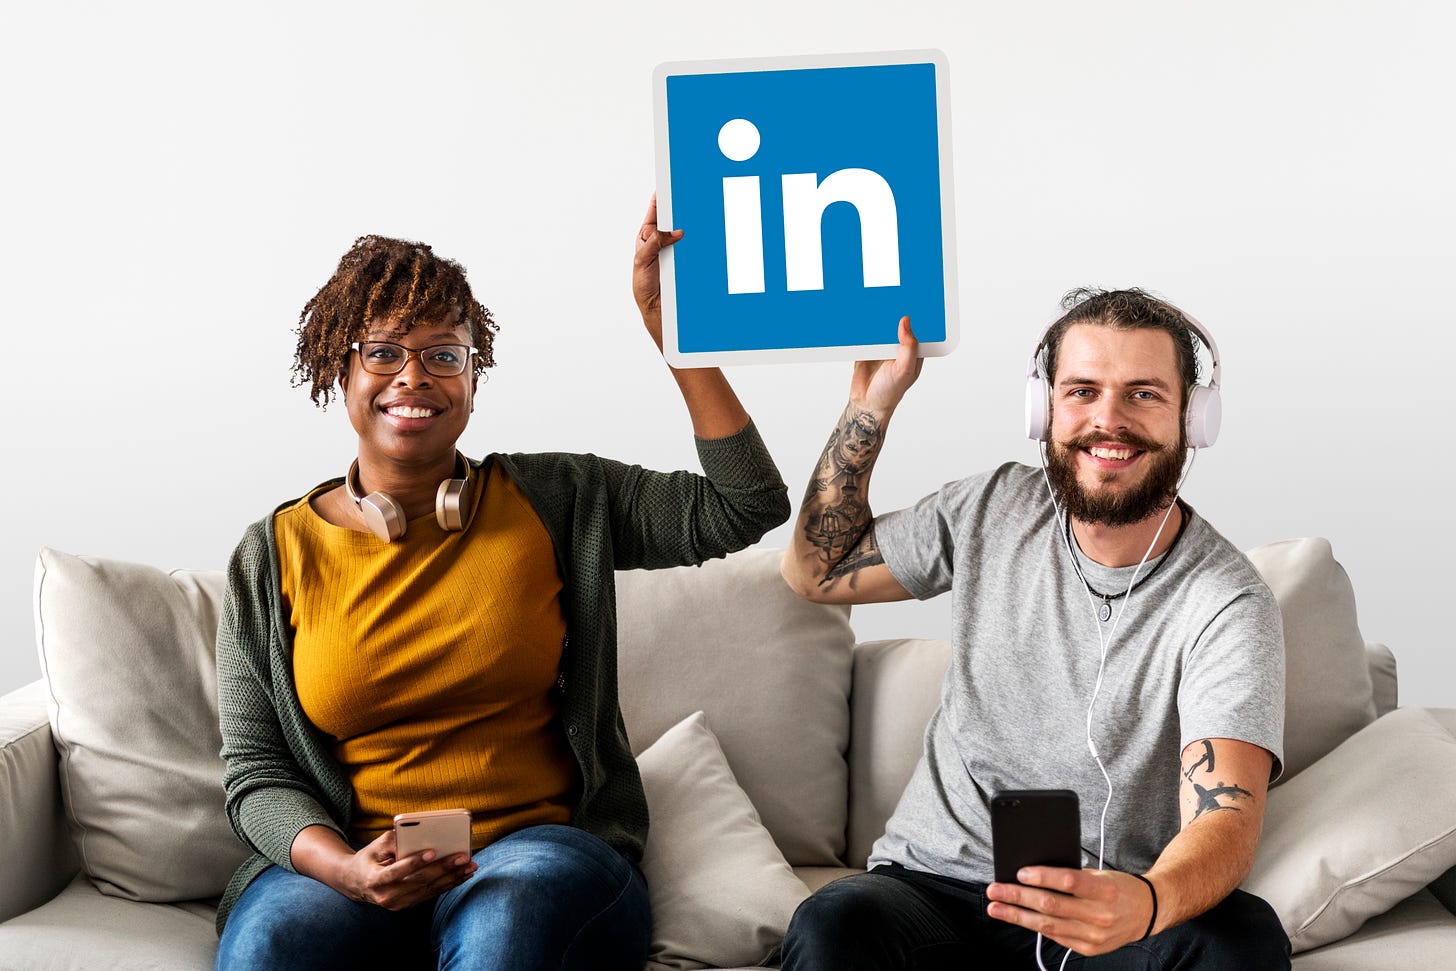 <a href="https://www.freepik.com/free-photo/people-holding-linkedin-logo_3539841.htm#query=LinkedIn%20Creators&position=0&from_view=search&track=ais">Image by rawpixel.com</a> on Freepik